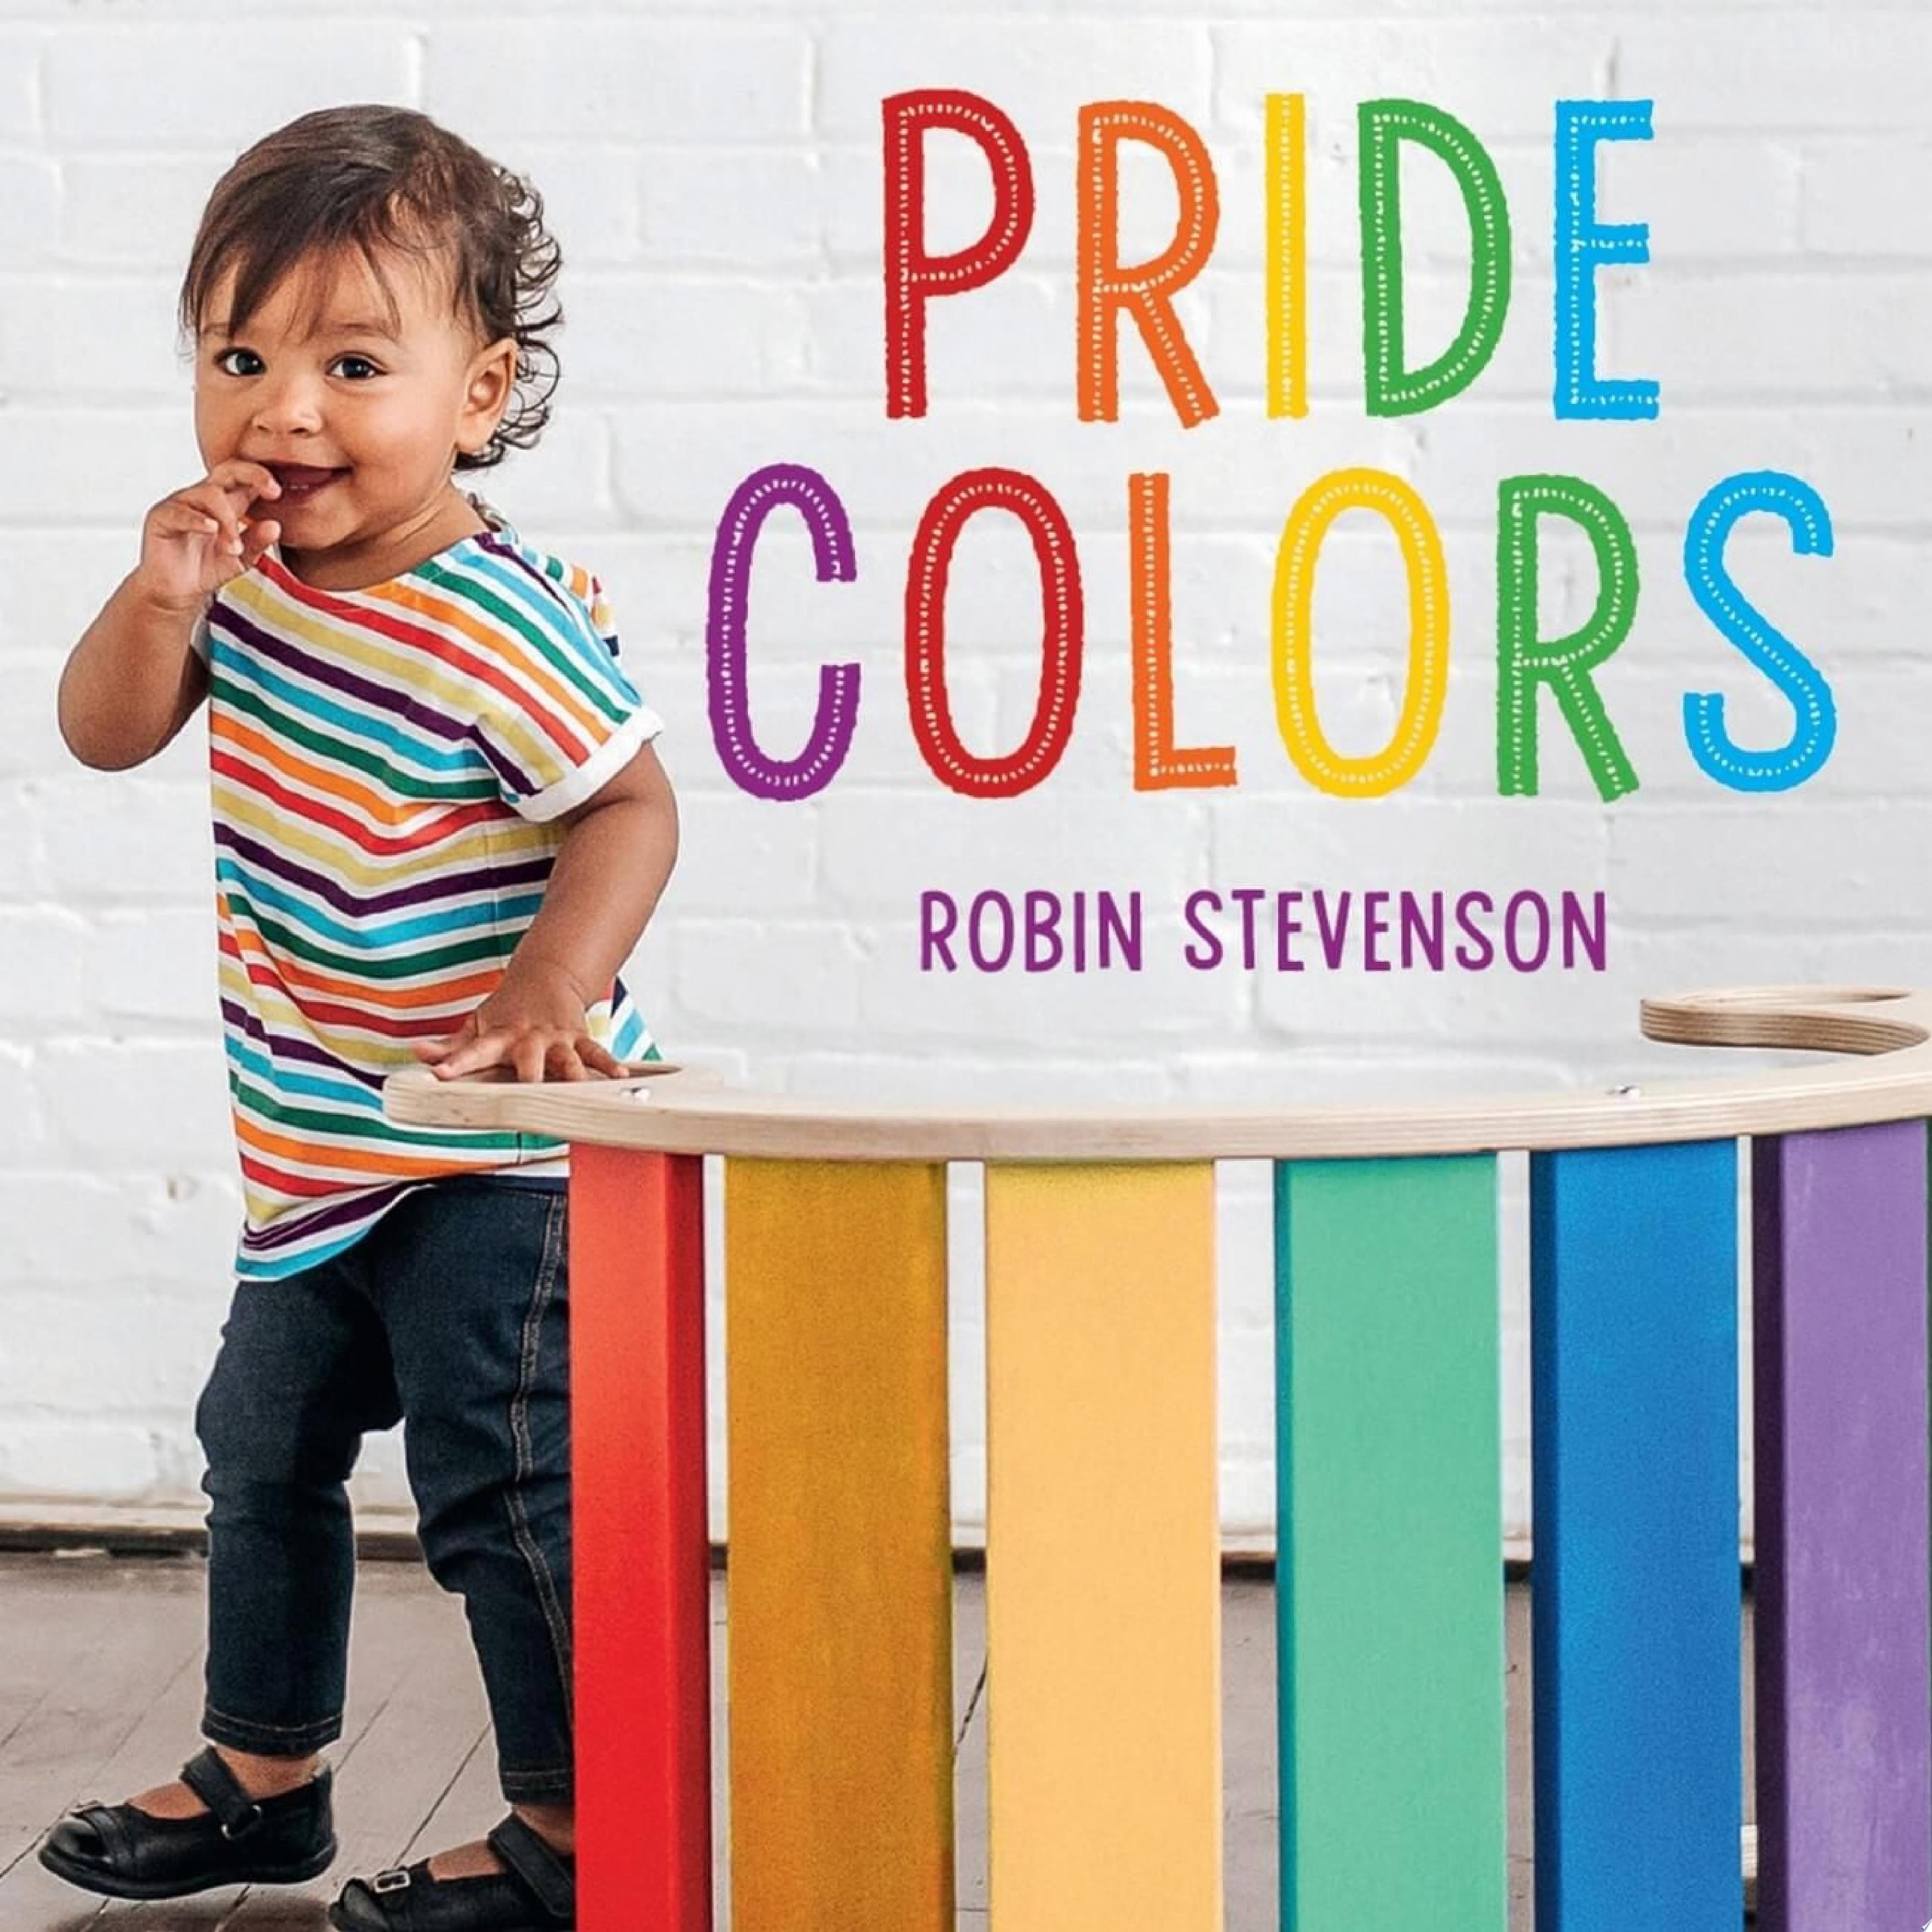 Image for "Pride Colors"